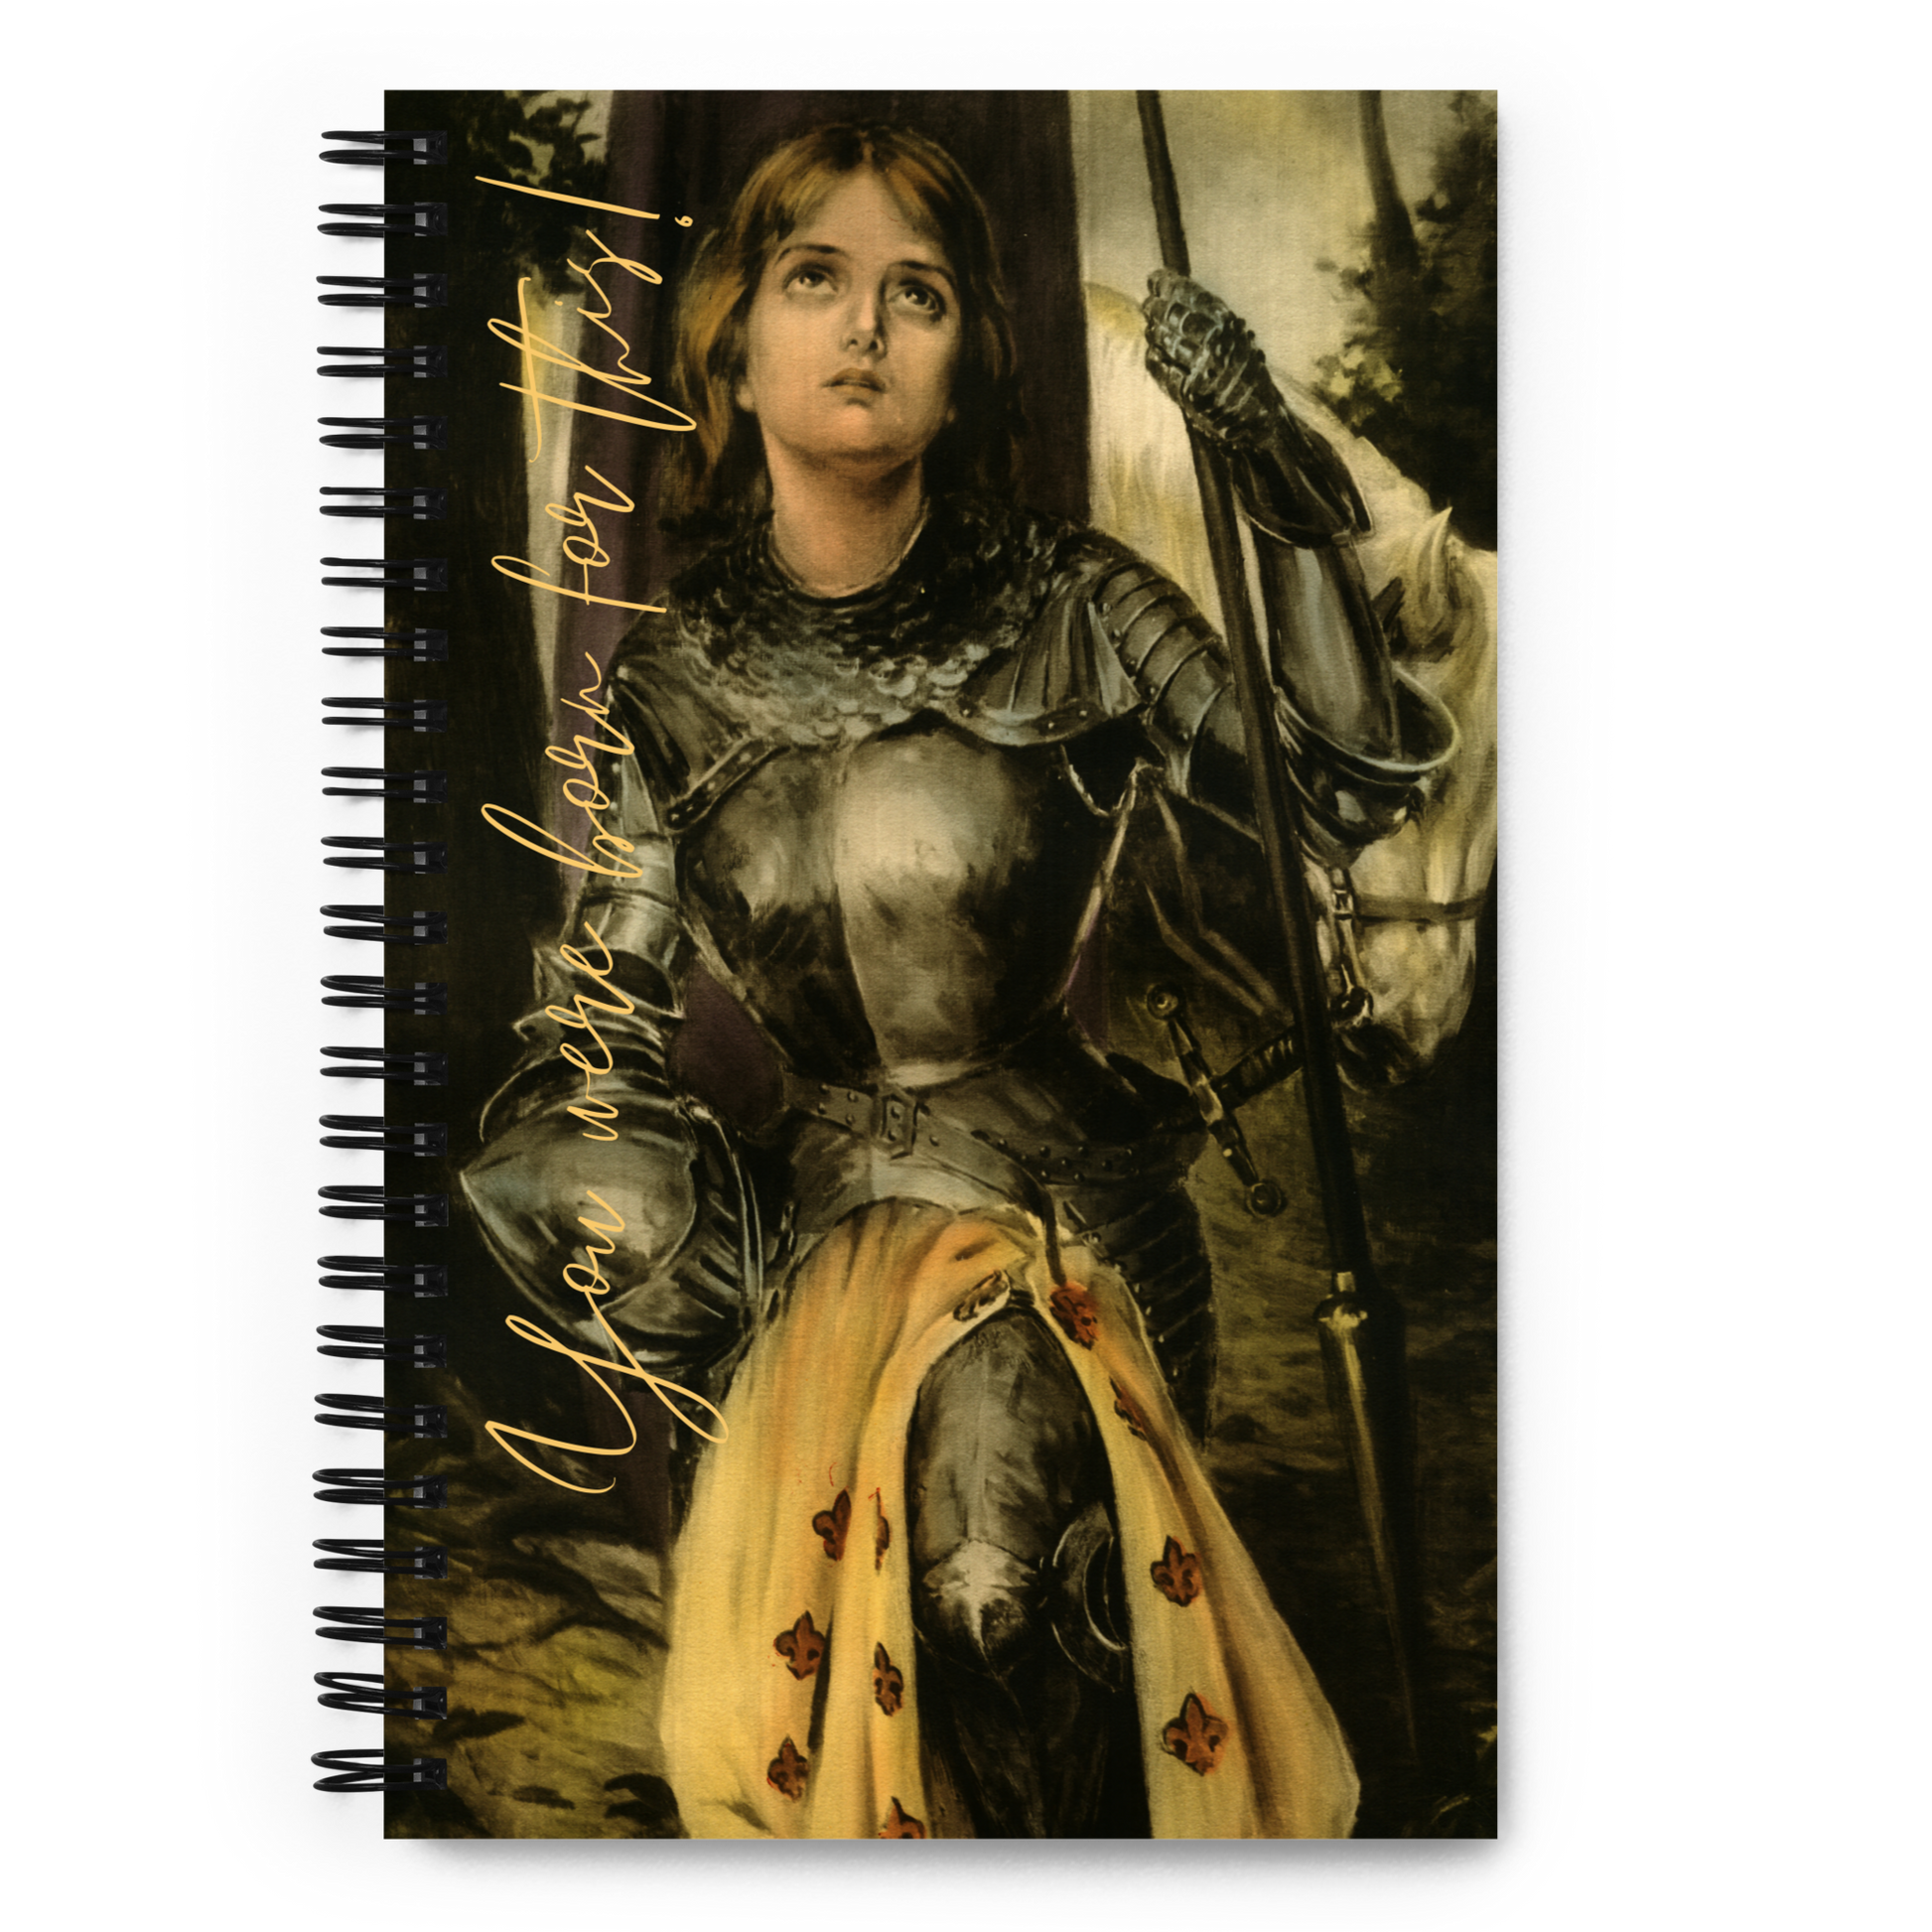 St Joan of Arc with Text Spiral Notebook - Dotted Paper - Studio Lams Creative Collective